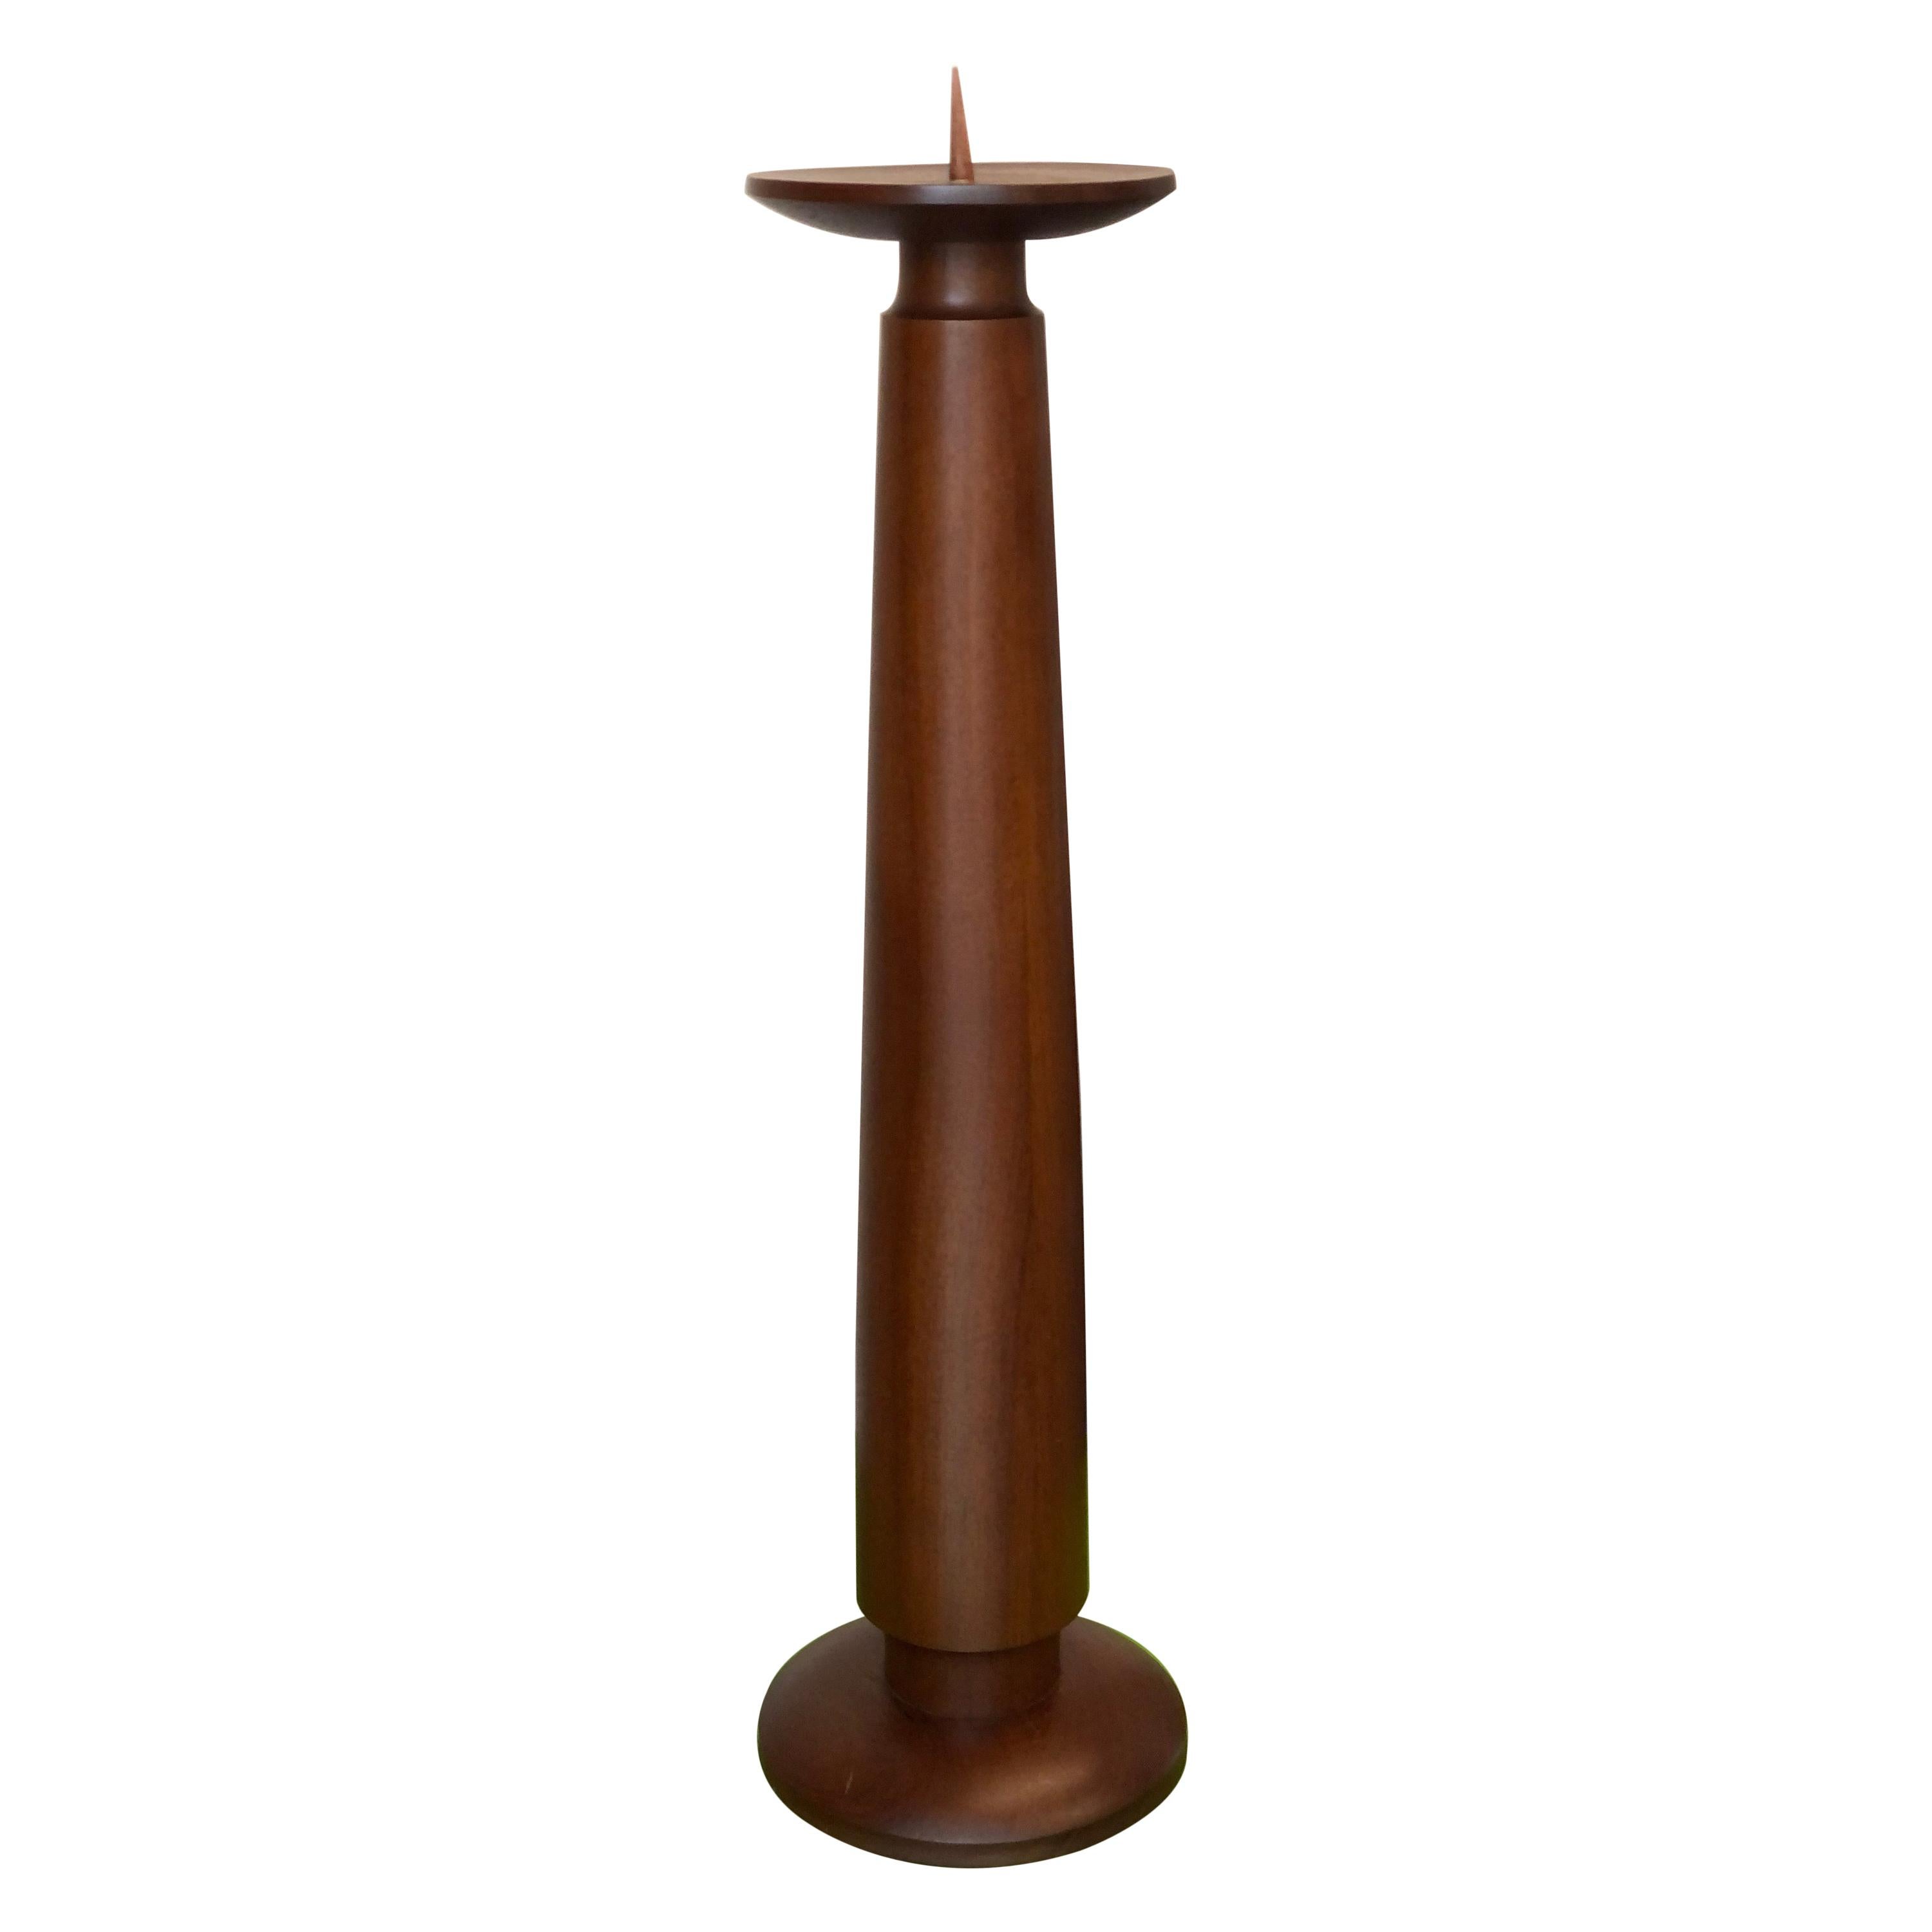 Large Vintage Danish Modern Teak Candle Stand, circa 1960s For Sale